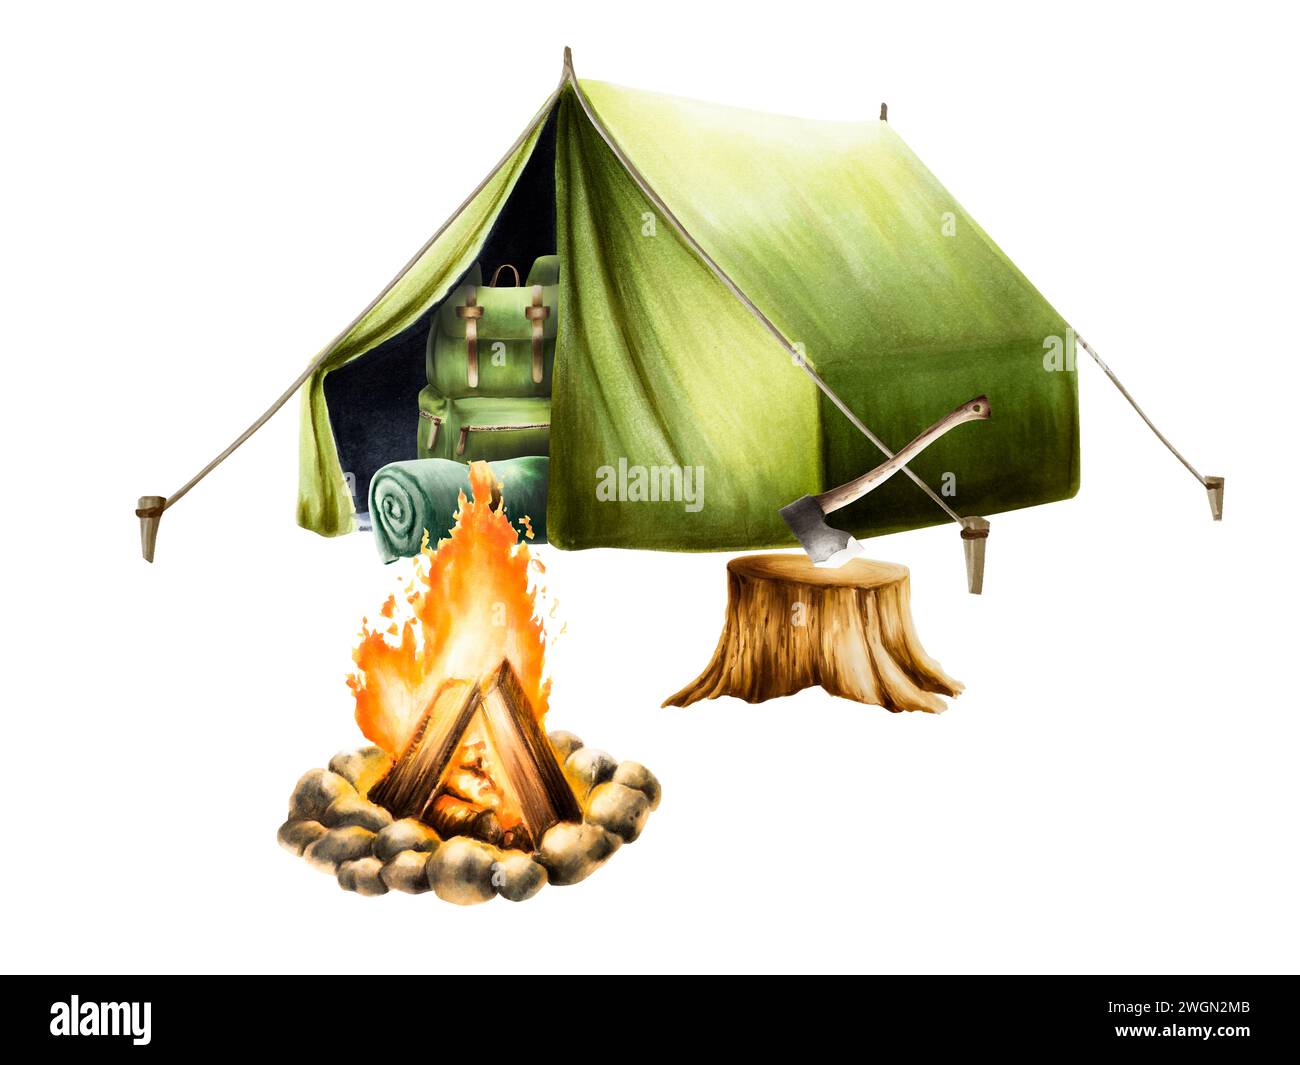 Watercolor campfire, camping axe in wooden stump and hiking and camping backpack, rolled up blanket and sleeping bag in green camping tent illlustrati Stock Photo